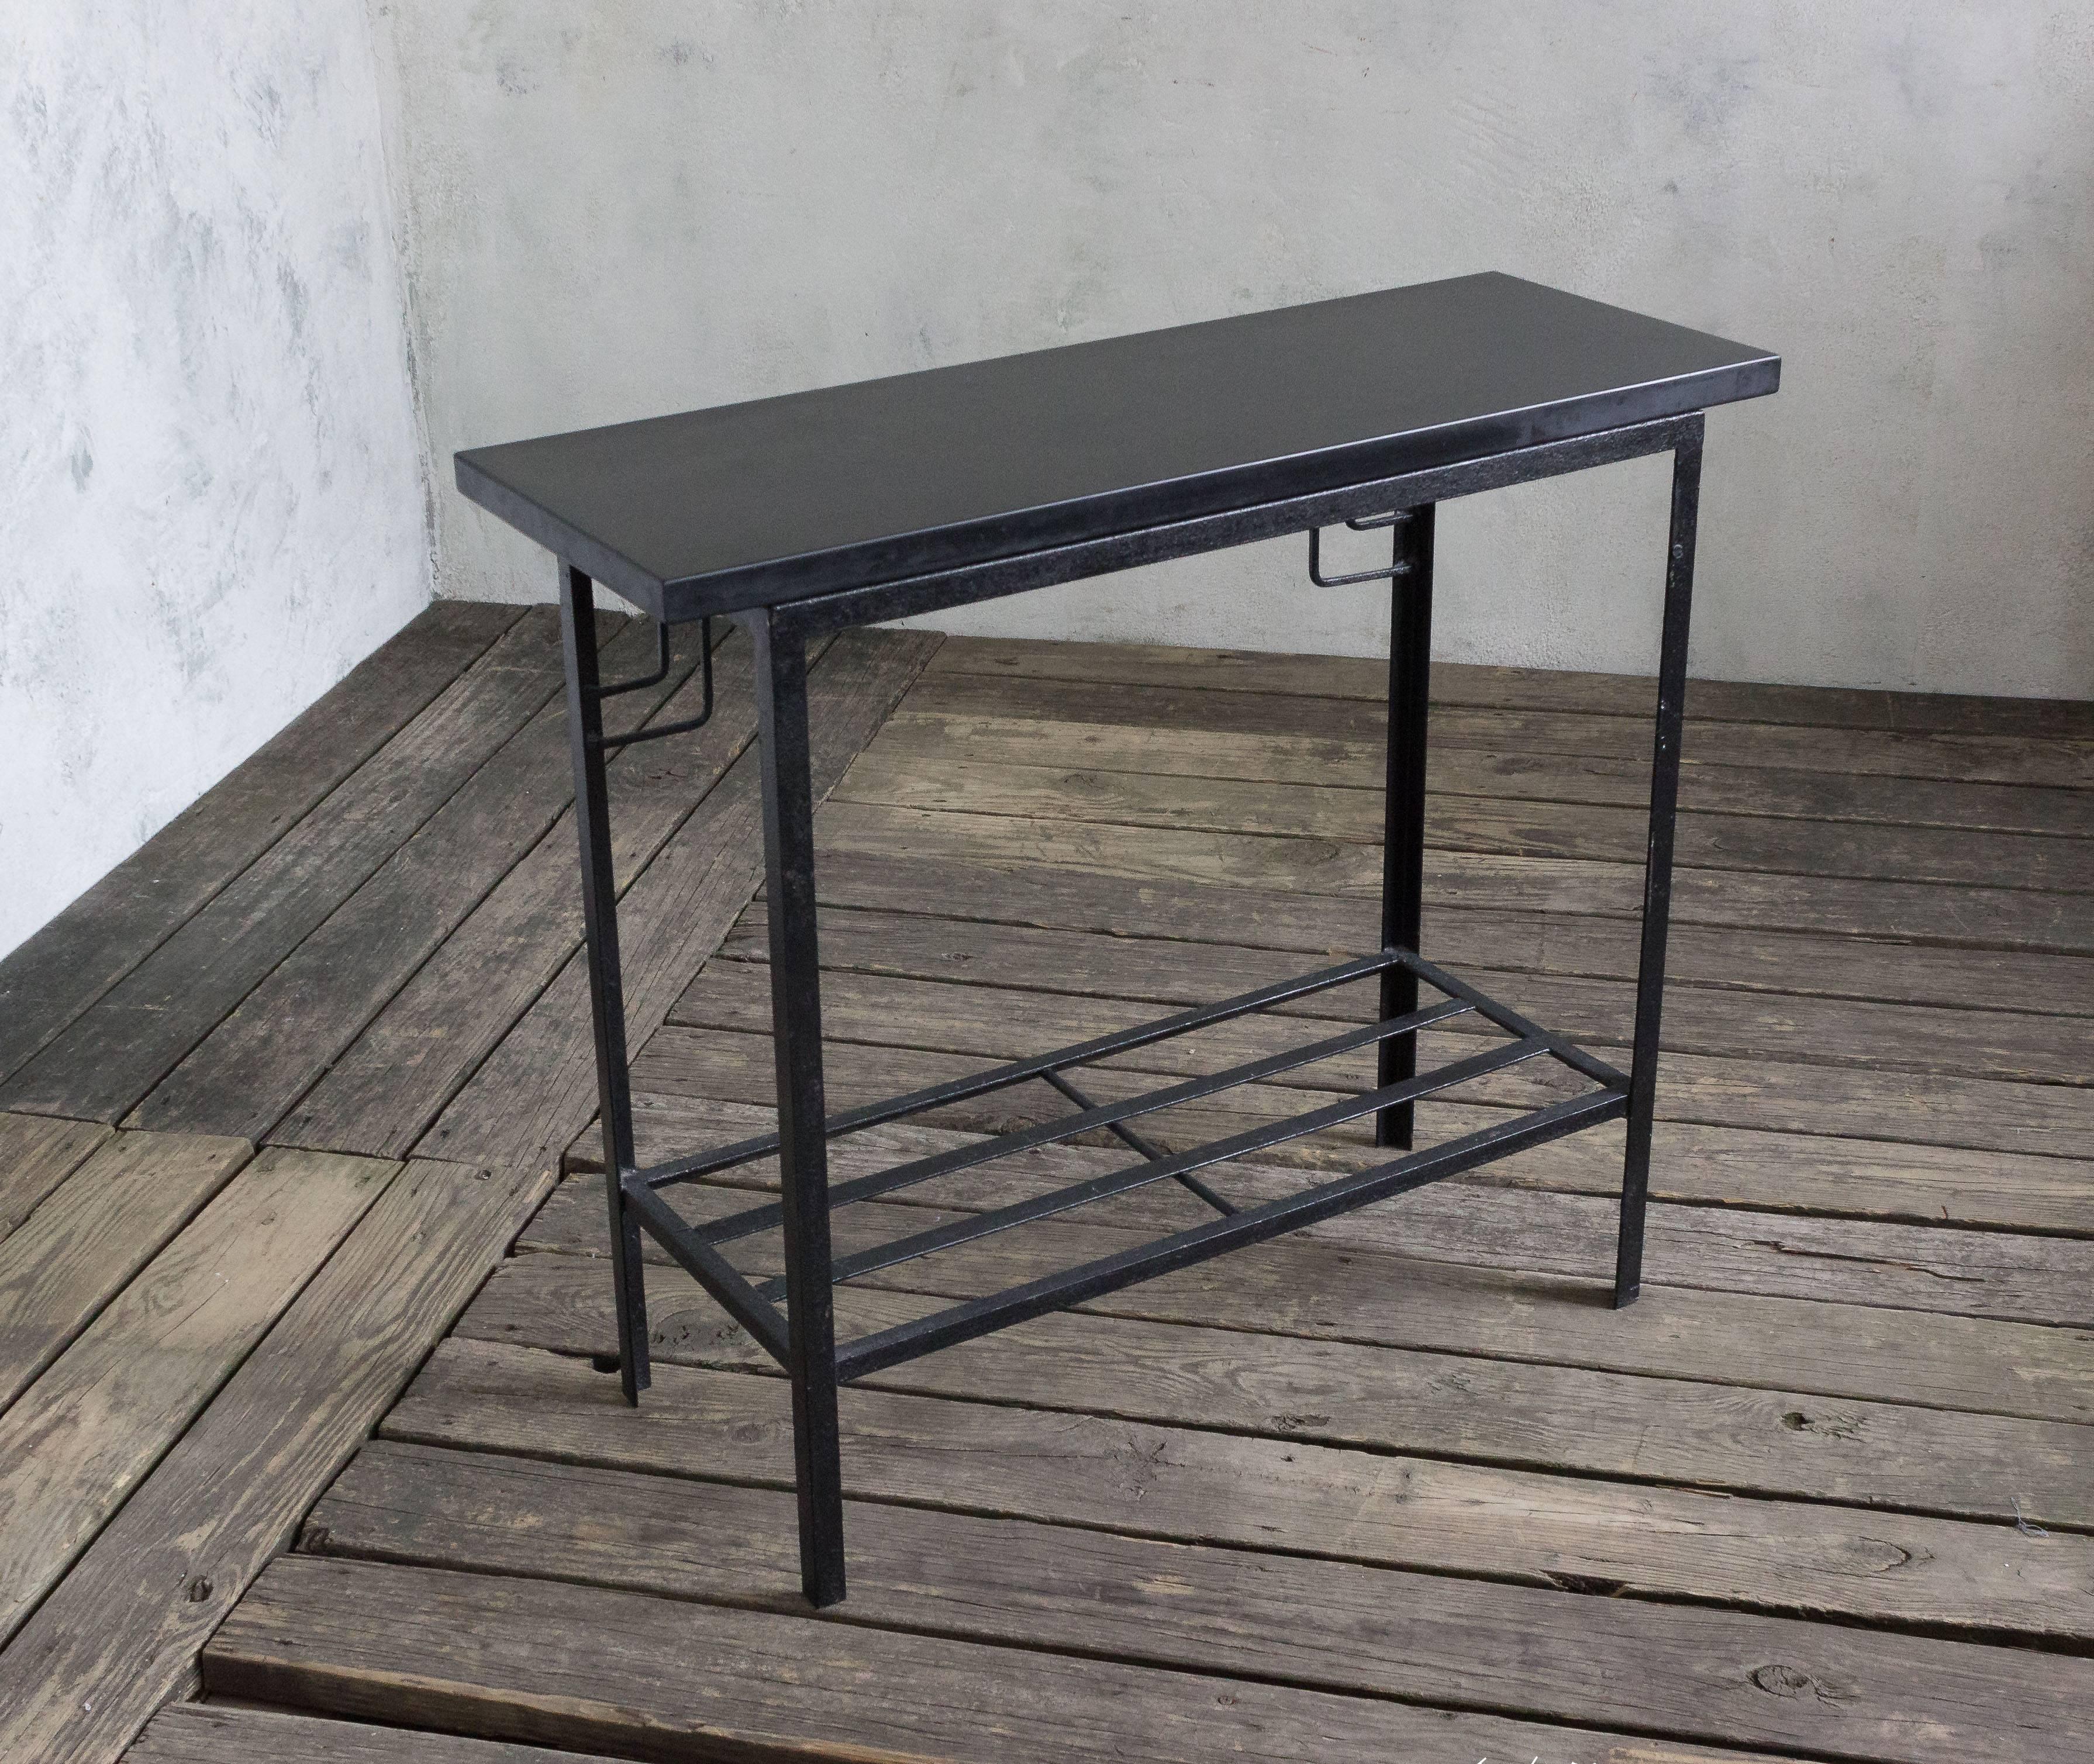 American Painted Black Iron Console with Black Stone Top, Mid-Century Modern